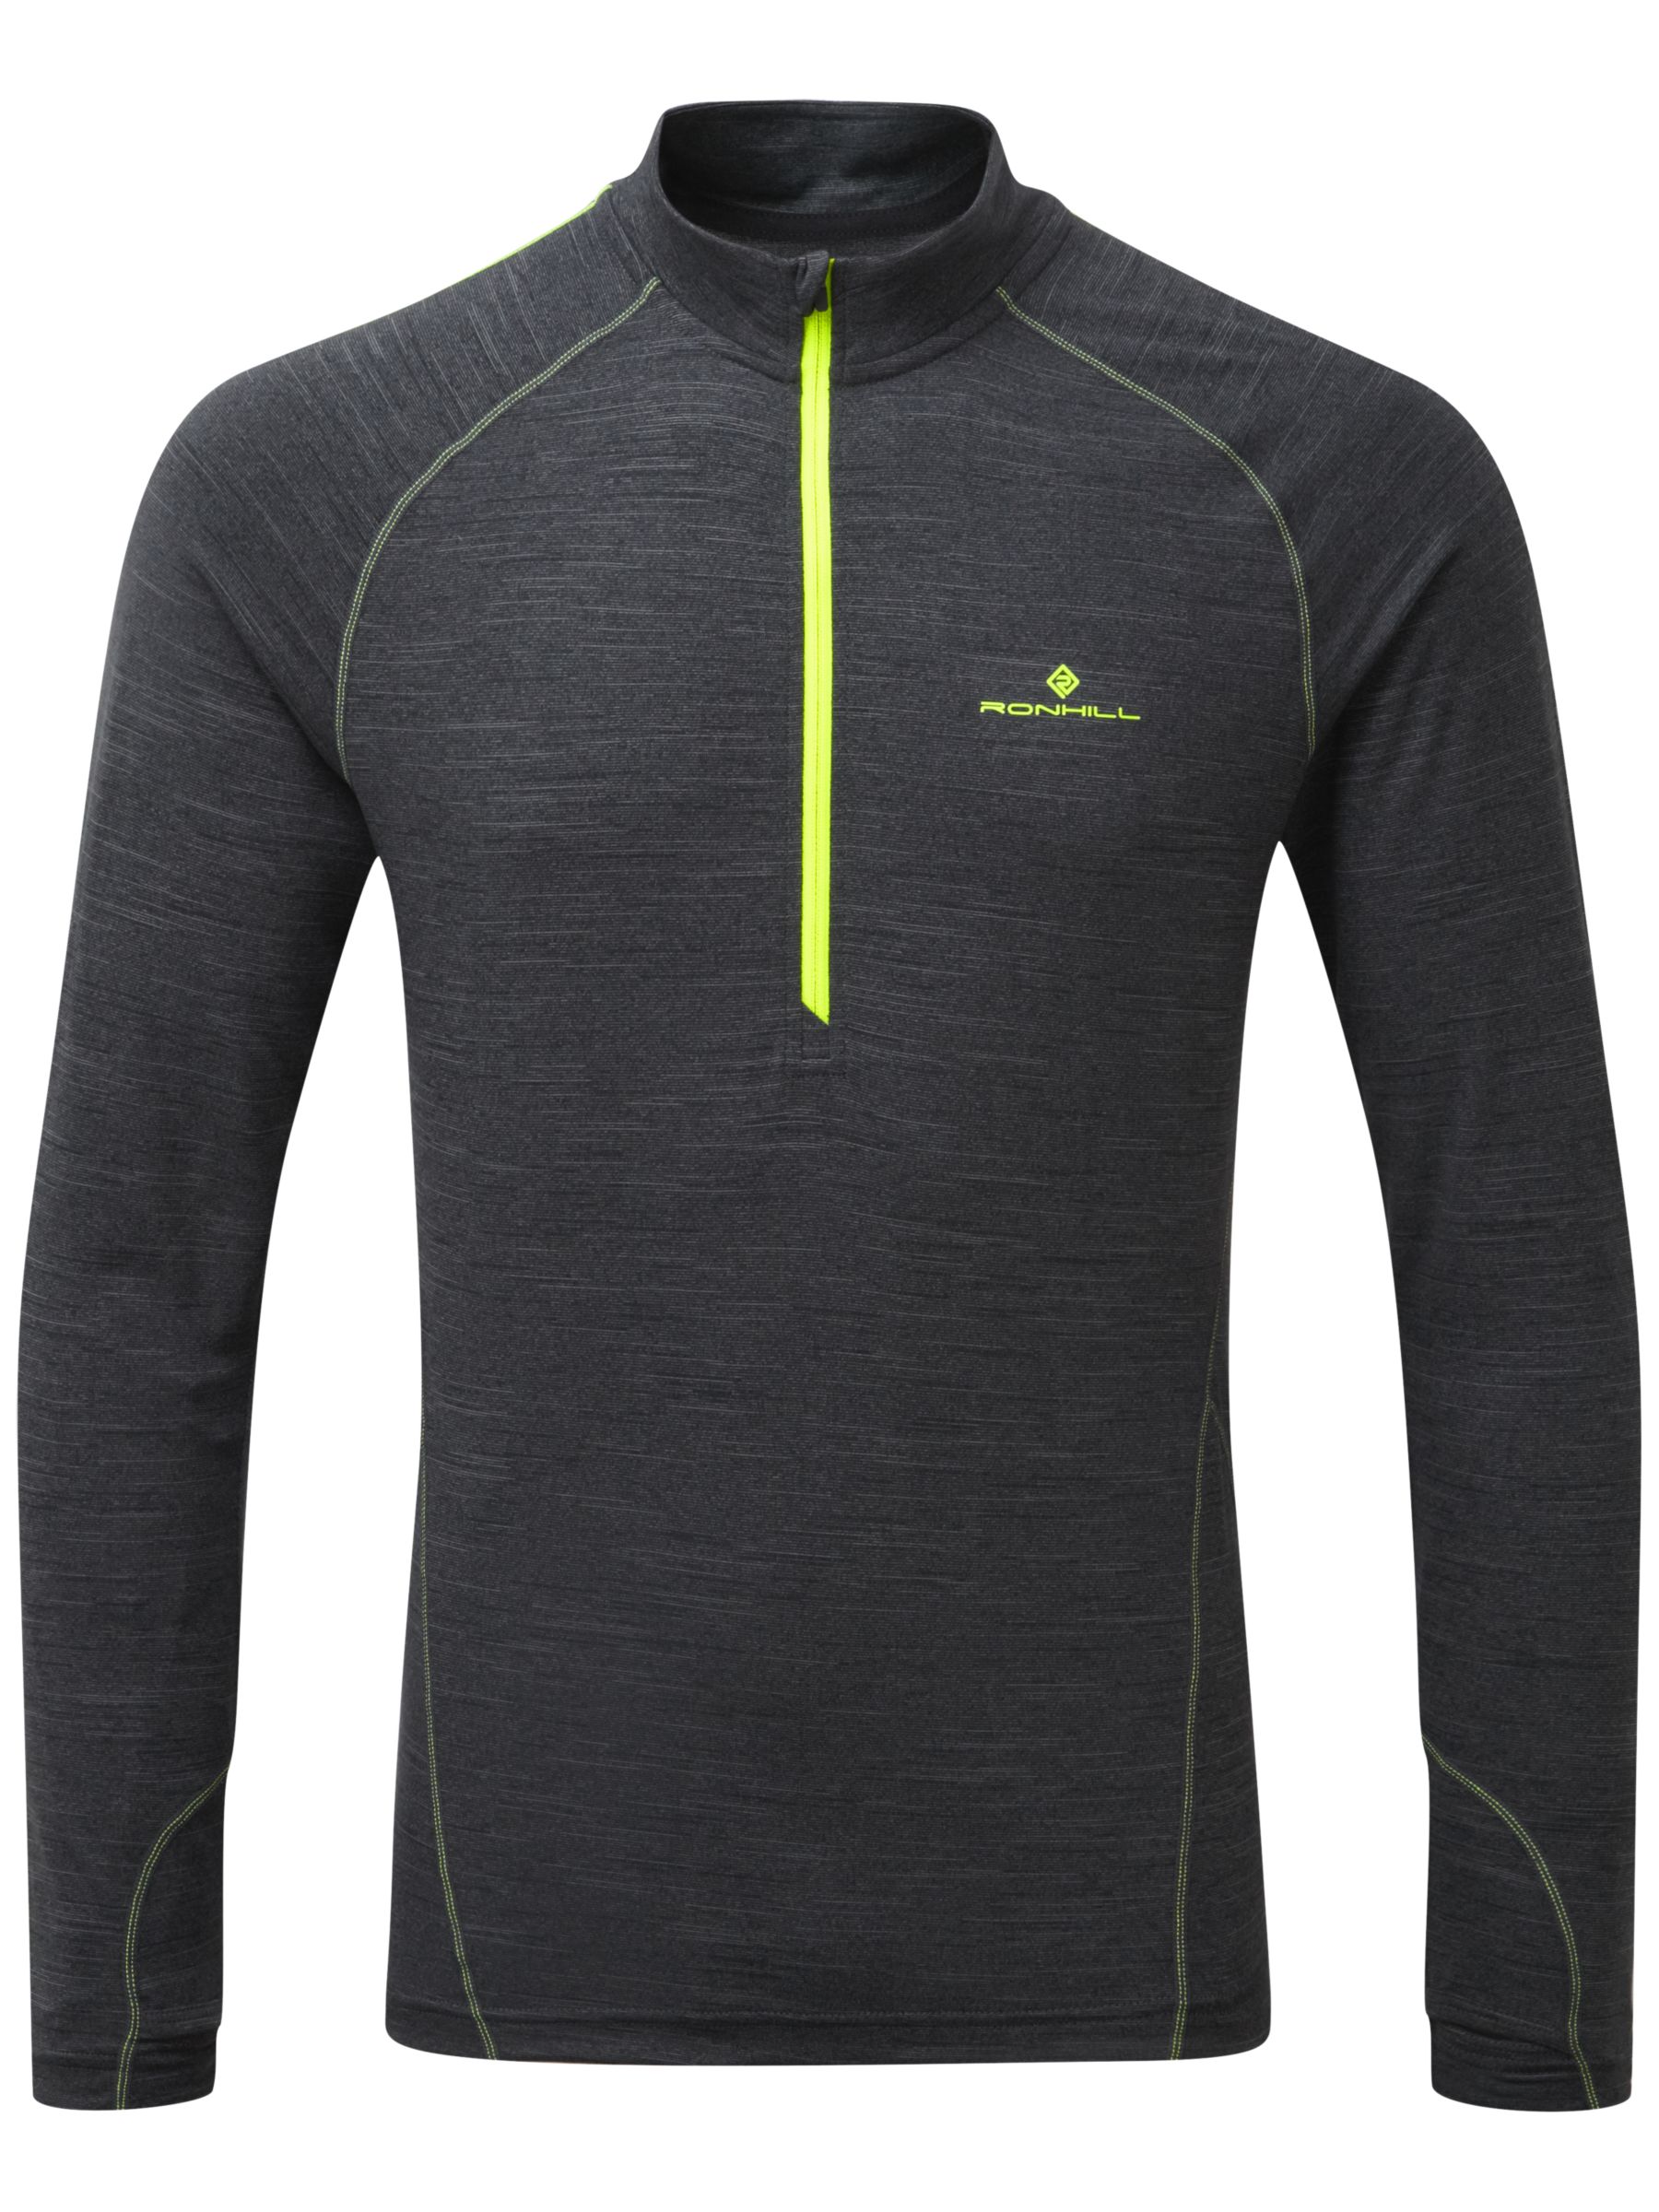 Ronhill Stride Thermal 1/2 Zip Long Sleeve Running Top, Charcoal